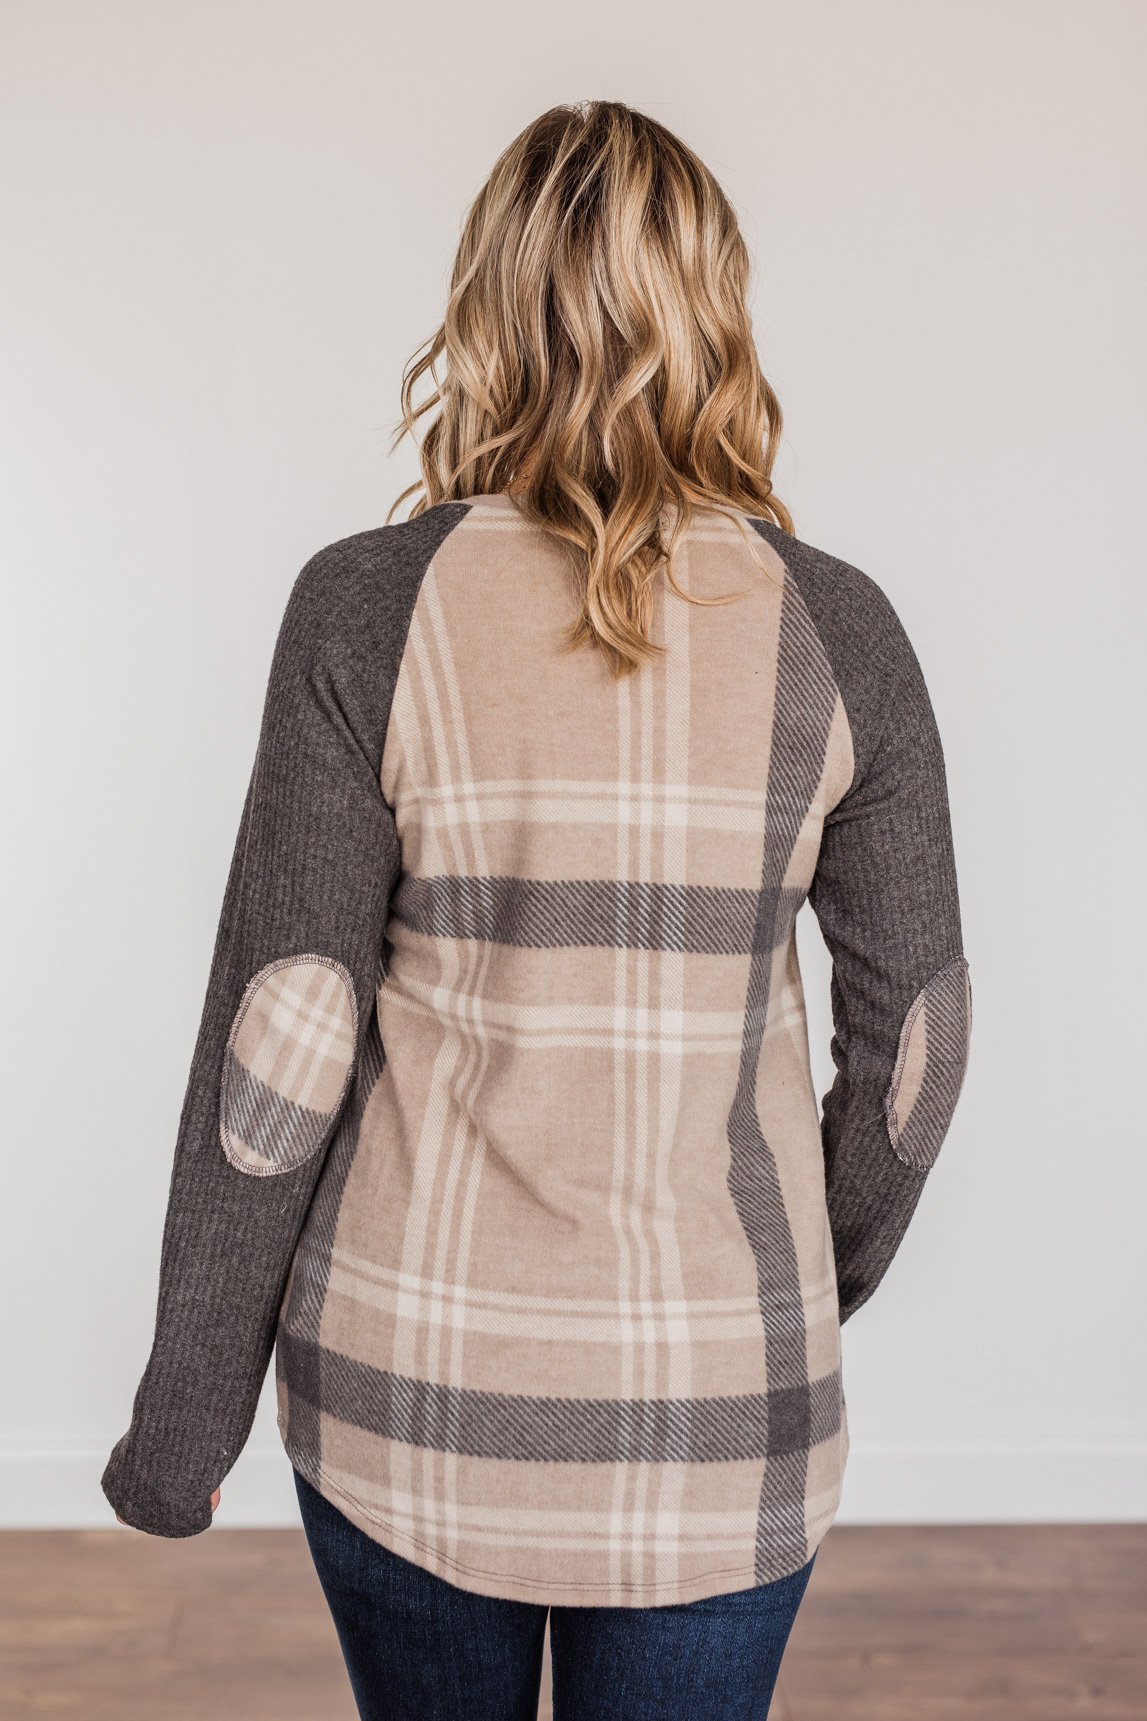 Decadent Days Long Sleeve Top- Taupe & Charcoal